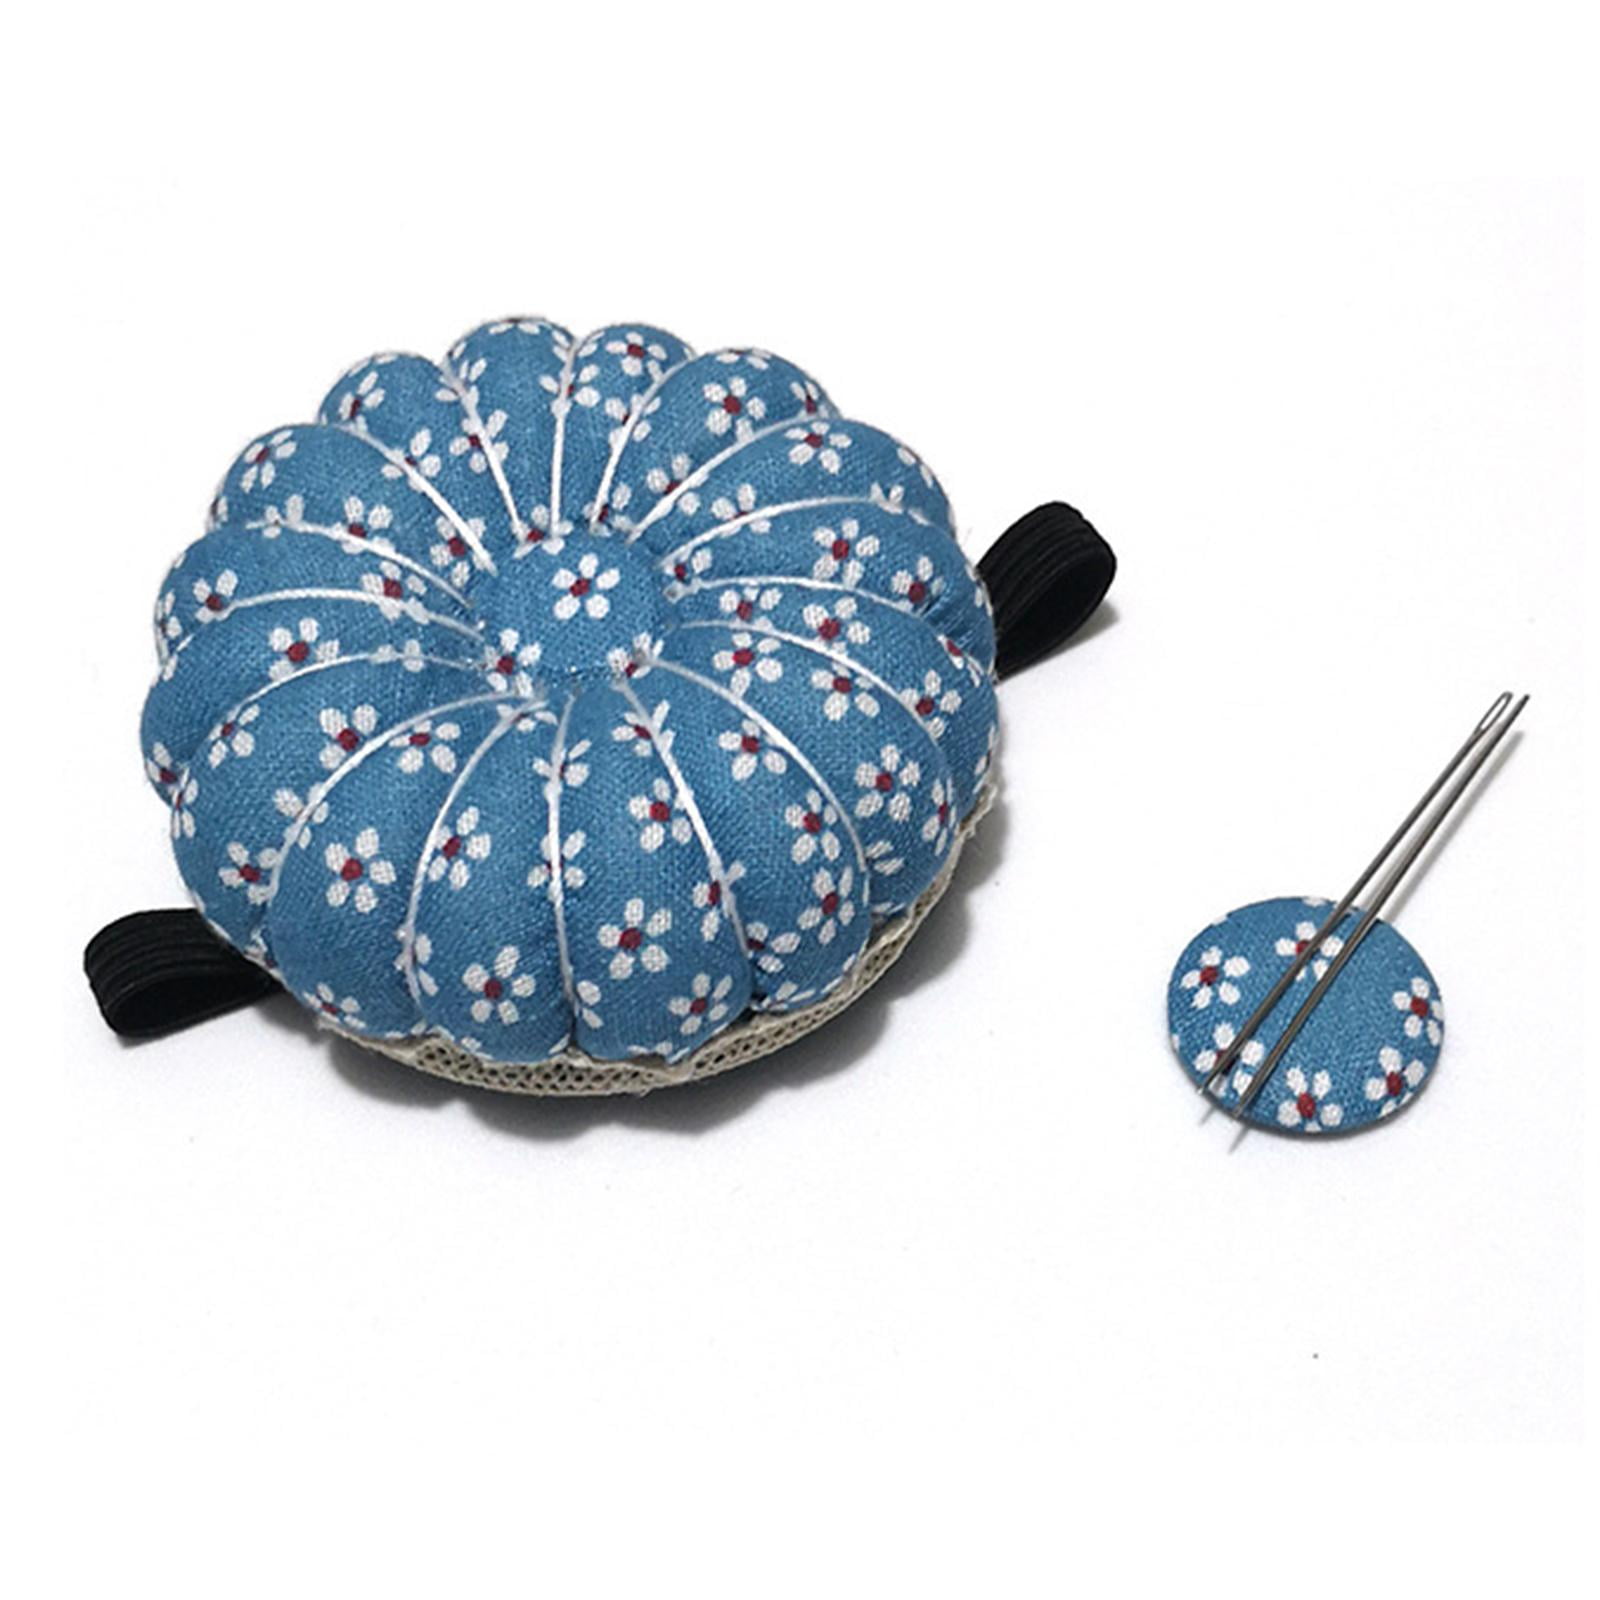 Set Of 2 Wrist Sewing Pin Cushions With Elastic Band - For